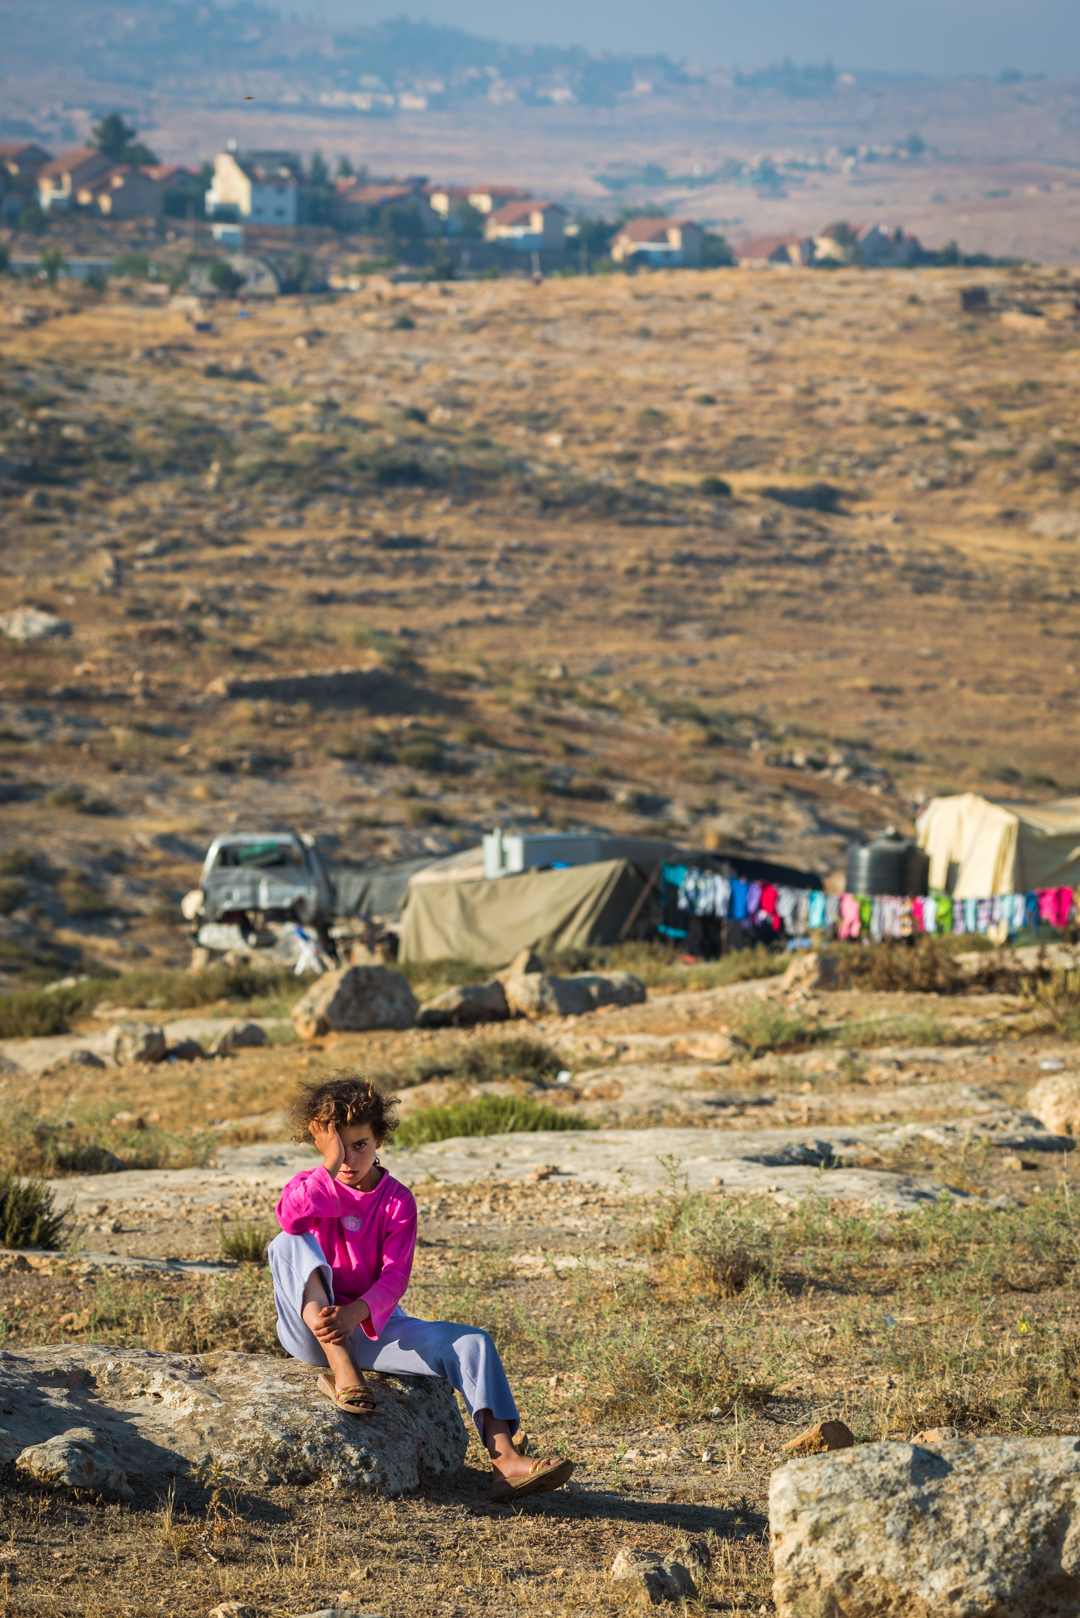 A Palestinian girl sits in front of Susiya, her village, overlooked by an illegal Israeli settlement on the hill. Although she's a child, she understands that because of the settlement, the Israeli authorities will soon demolish her home and village.